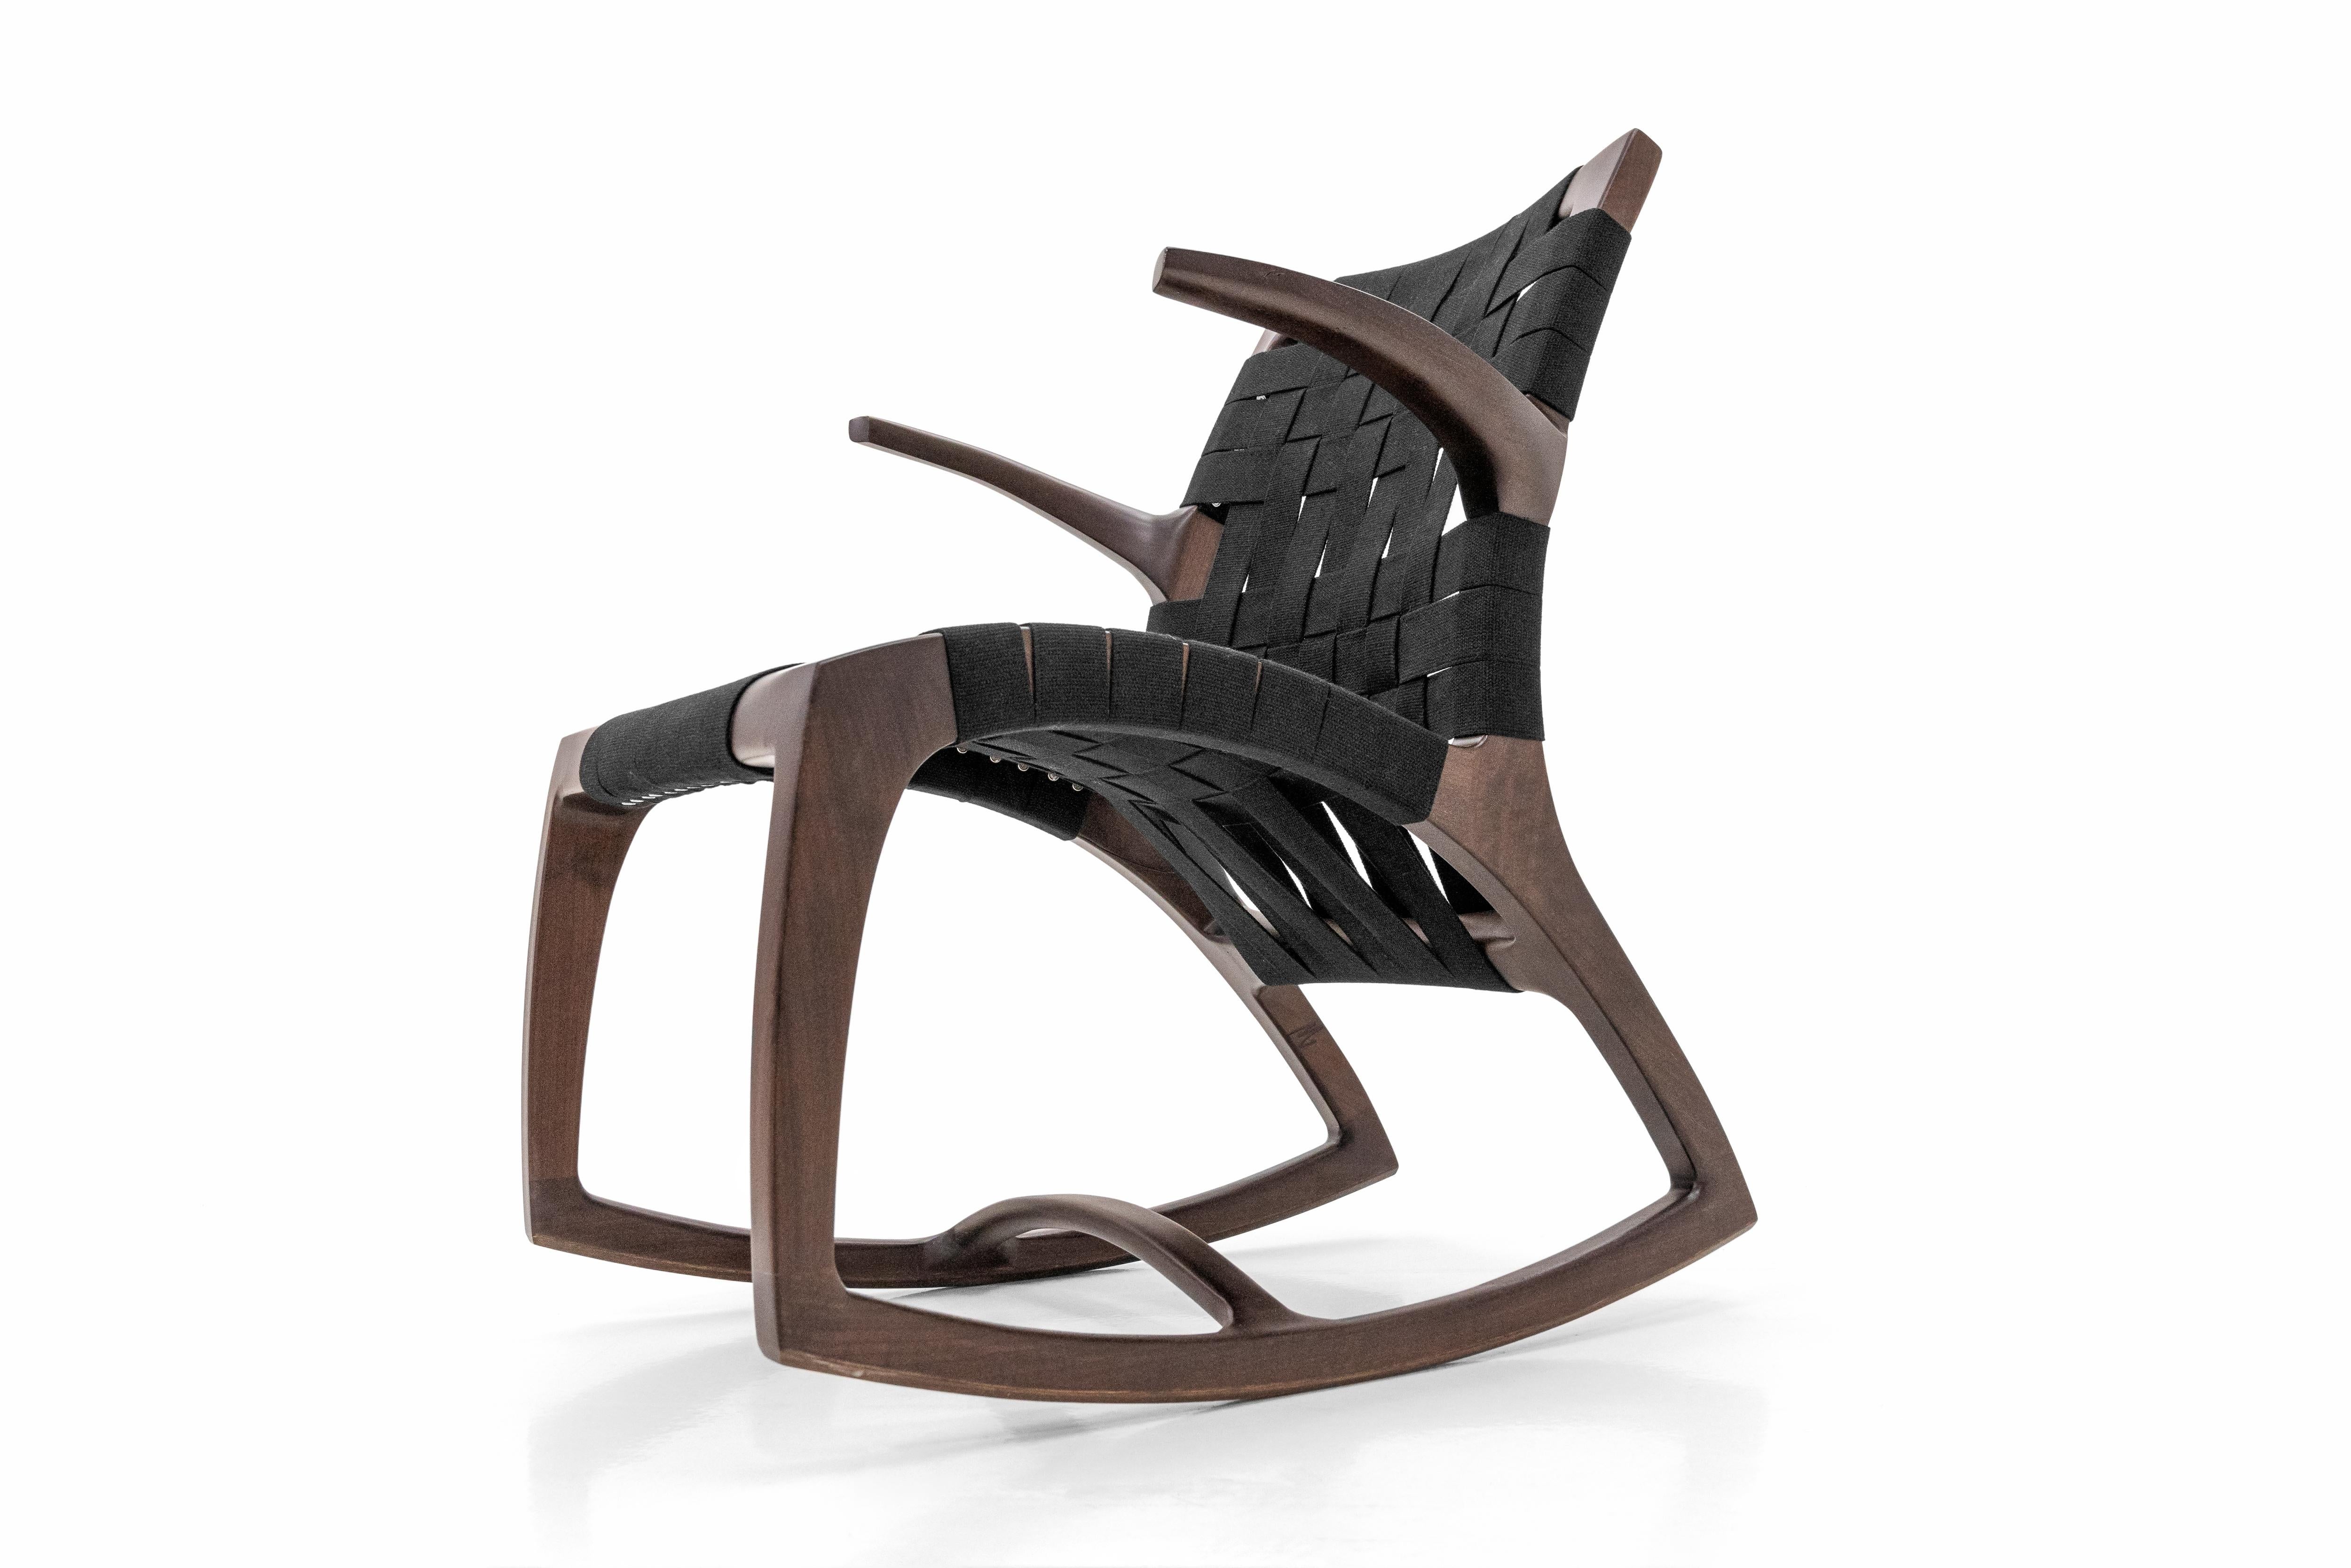 Ebonized walnut. Rocking chairs have been a focus of furniture designers for centuries, quite simply because they are difficult to make. Here’s one where comfort and design meet right in the middle. The Luna Rocker was designed by Martin Goebel in